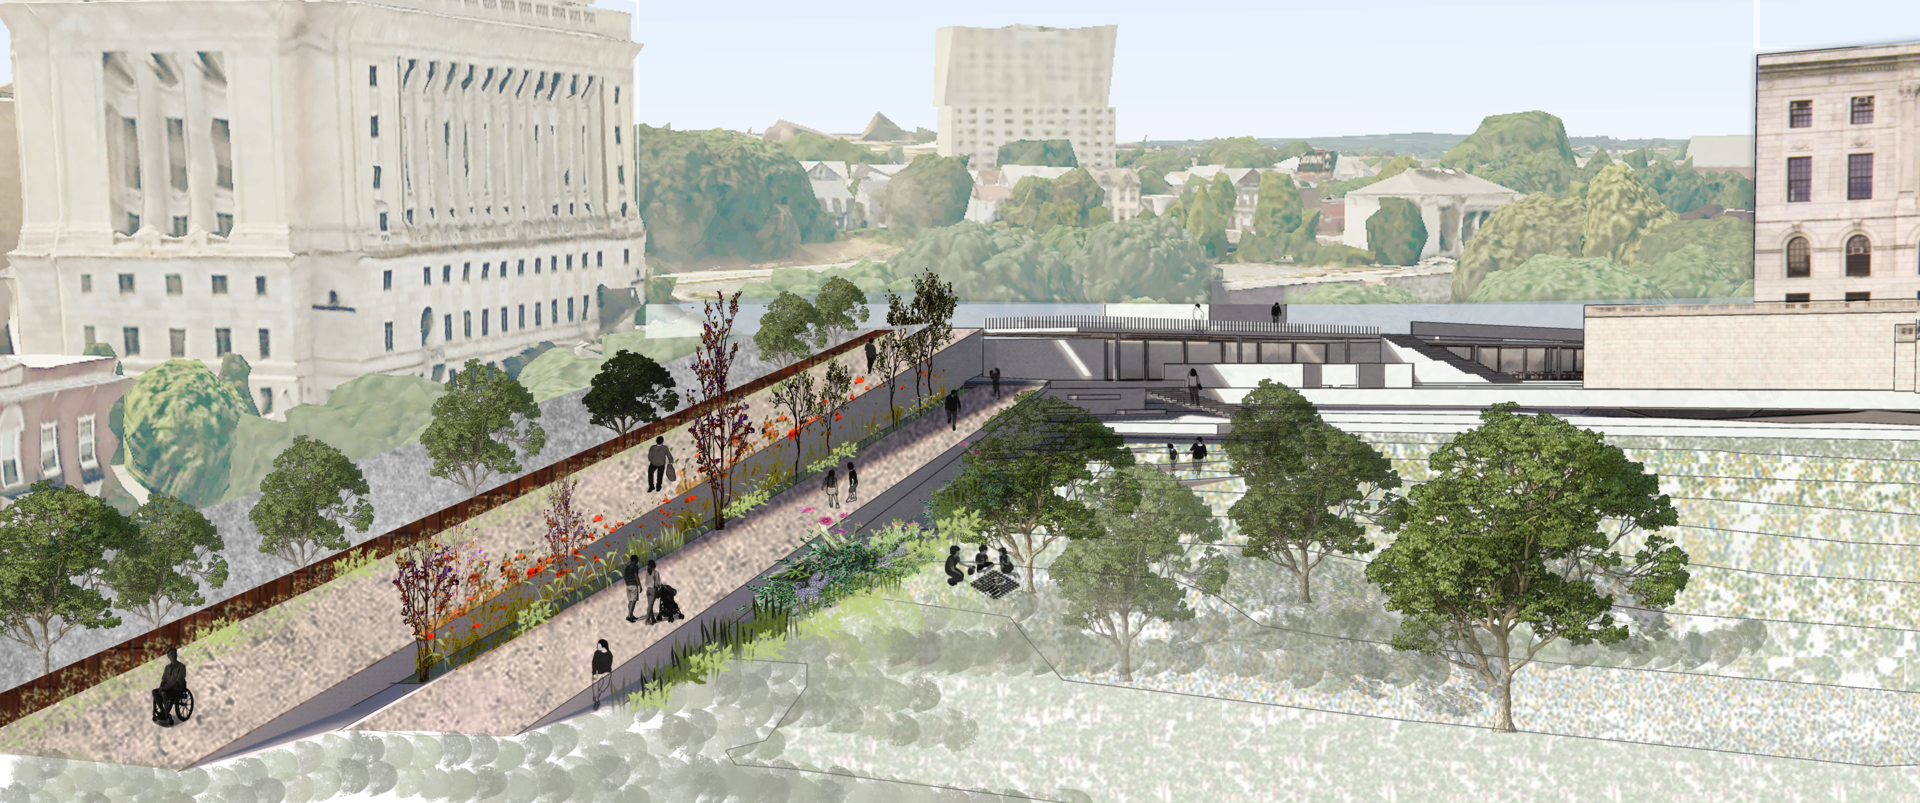 The AgroWing is realized as a new architectural and landscape design providing permanent infrastructure for the site’s future as well as a substantial culture of recreation and labor. The topographic modeling of the site provides the underlying framework for the intervention. As an extension of an architectural solution, a ramp is introduced from the front entrance of the site that acts as a metaphor of welcoming people with its arms wide open.